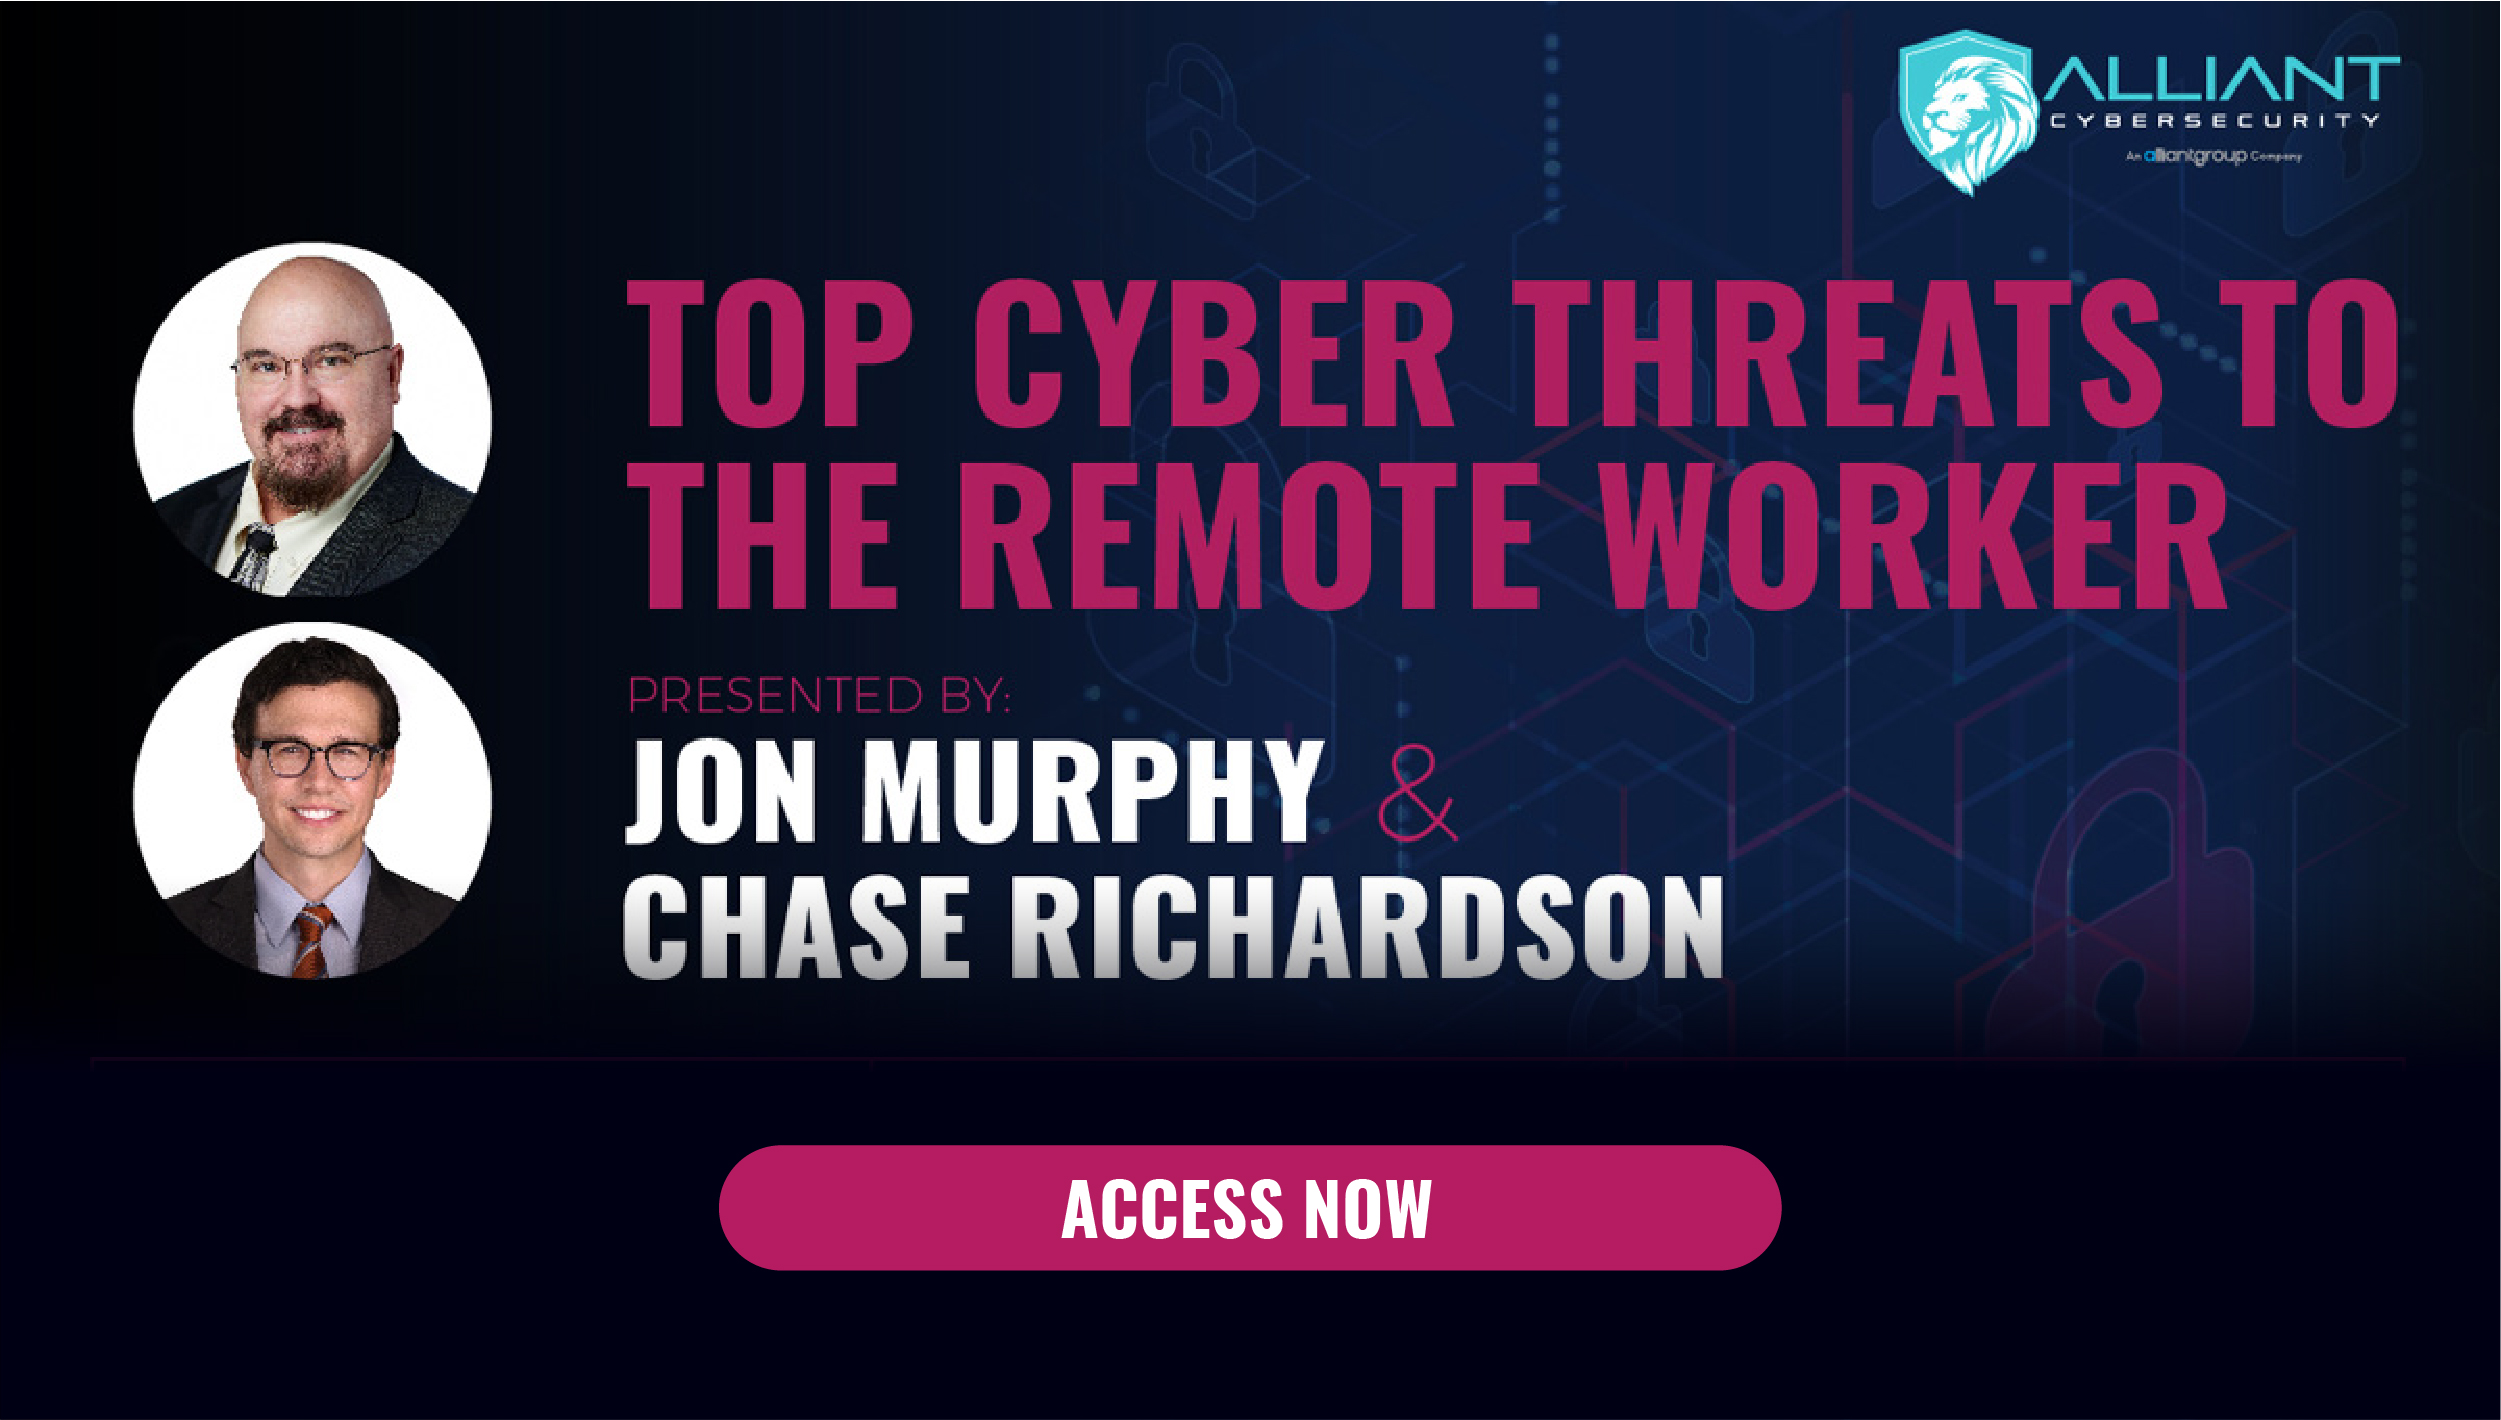 Top Cyber Threats to the Remote Worker